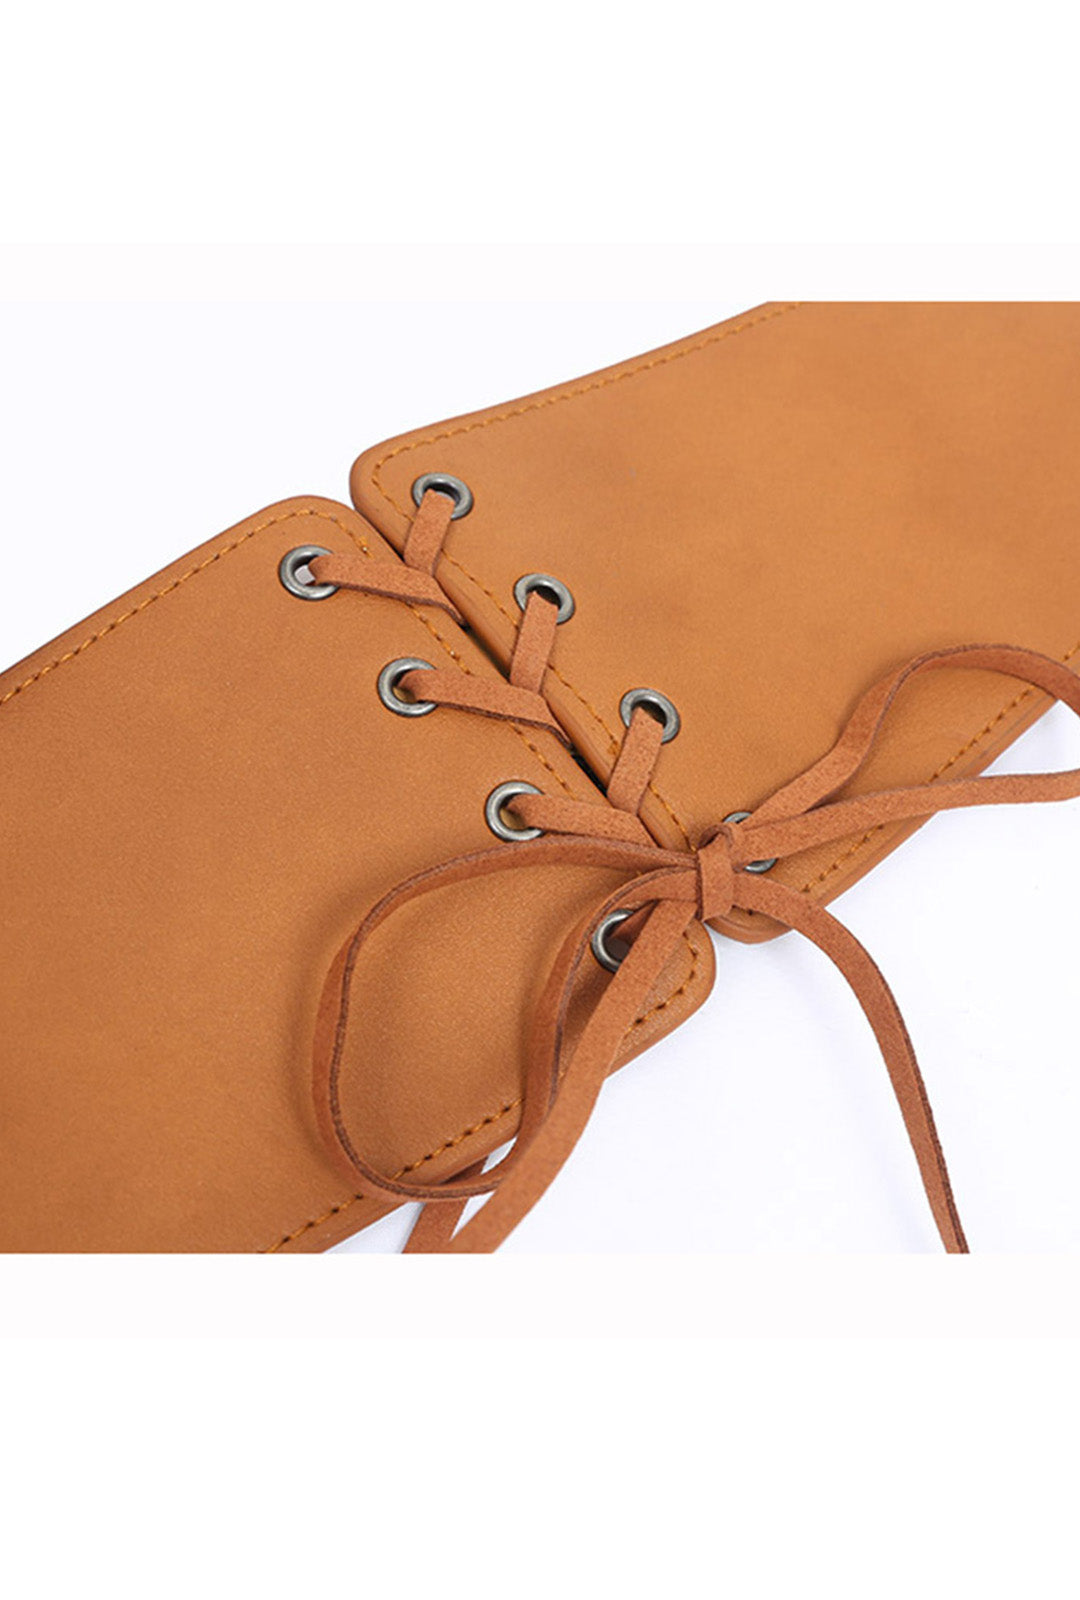 Tan Brown Pleather Lace-Up Belt